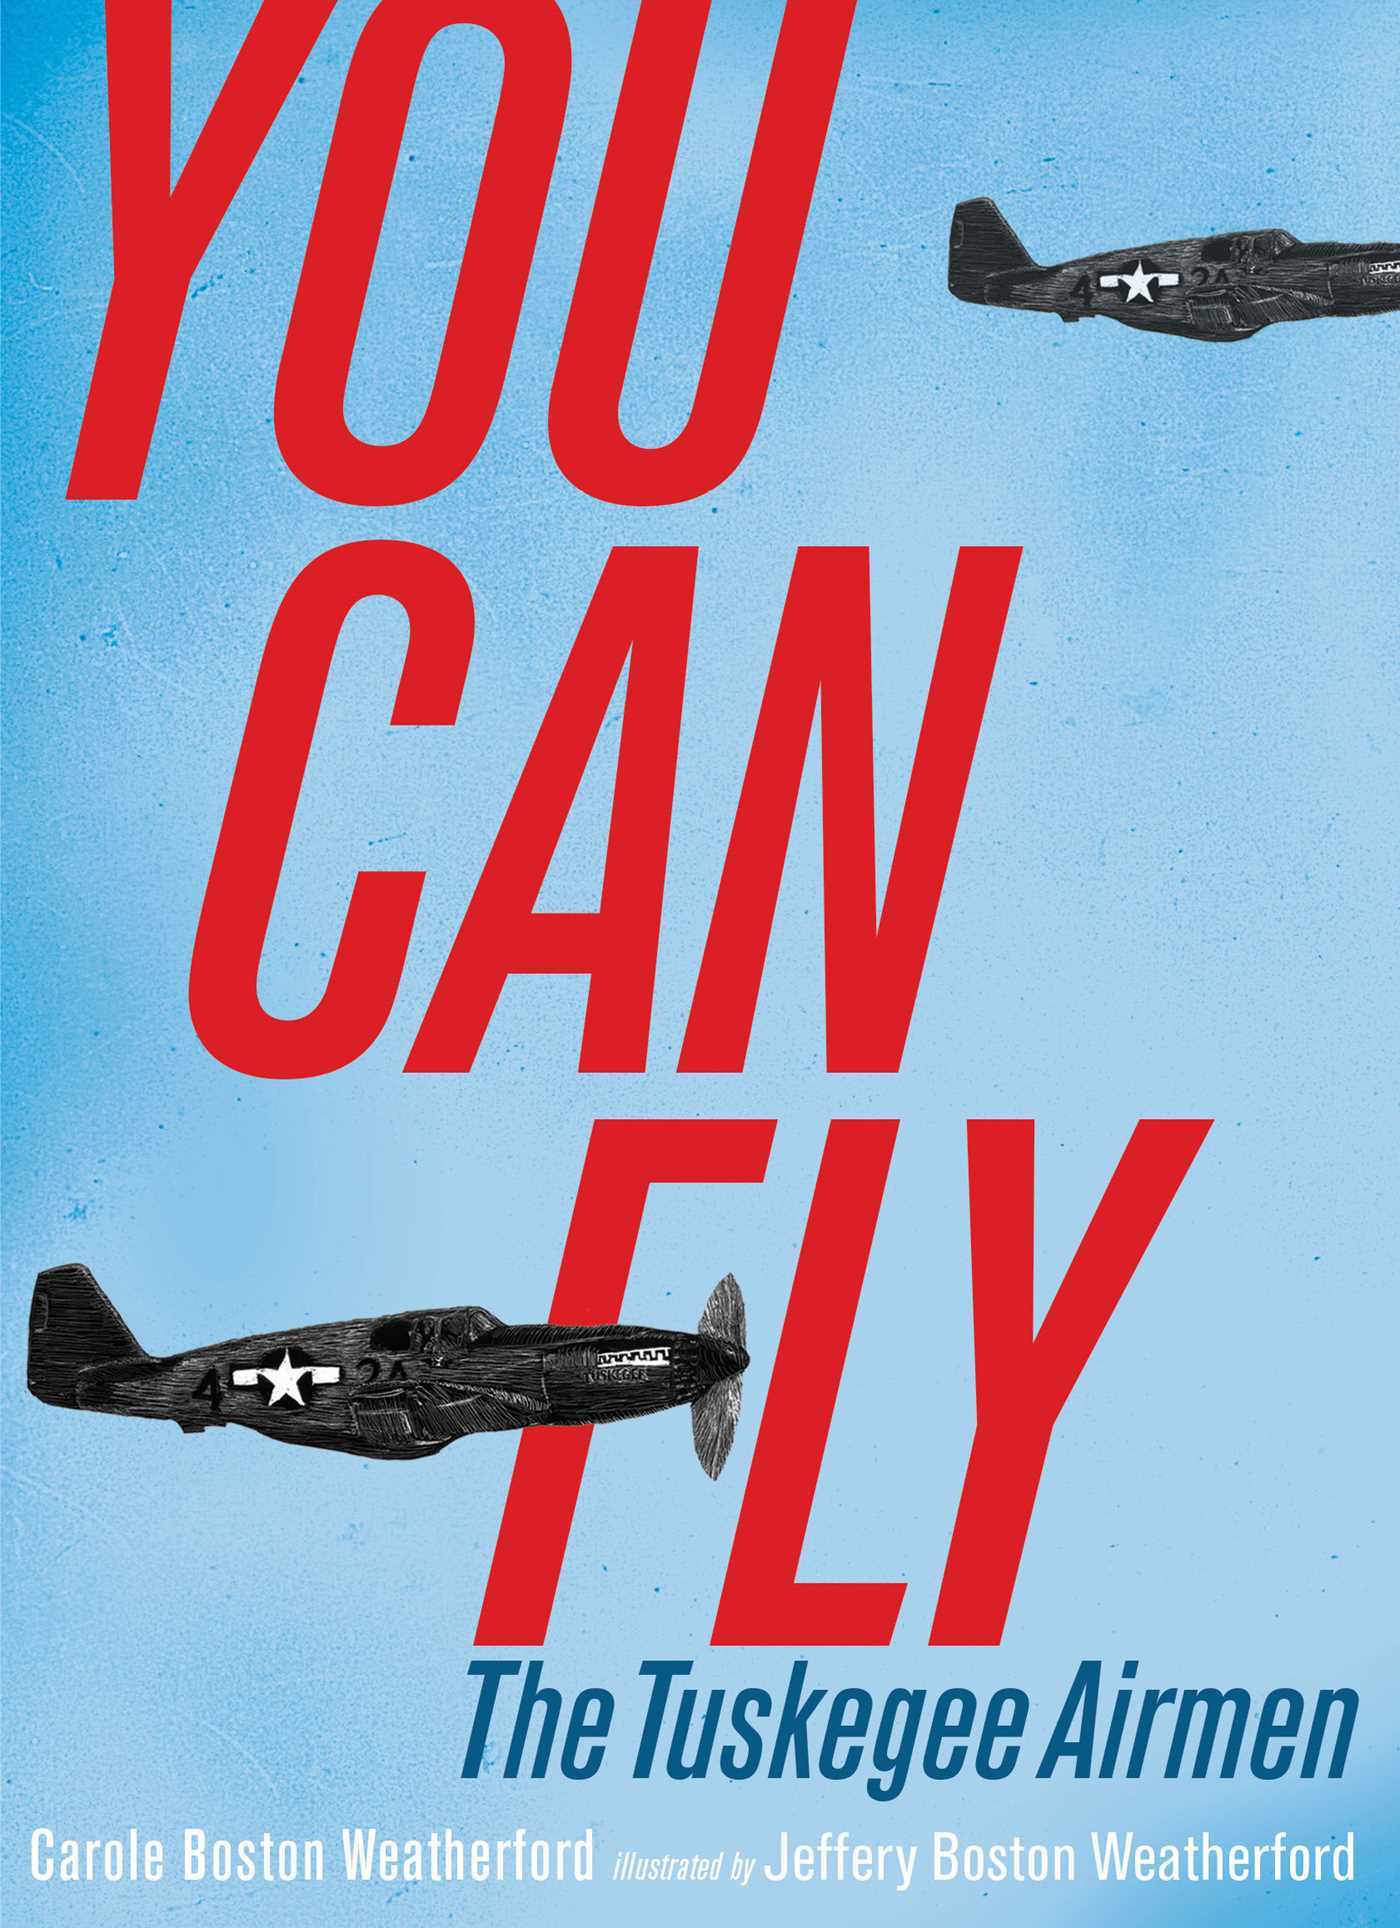 You can fly the tuskegee airmen by carole boston weatherford